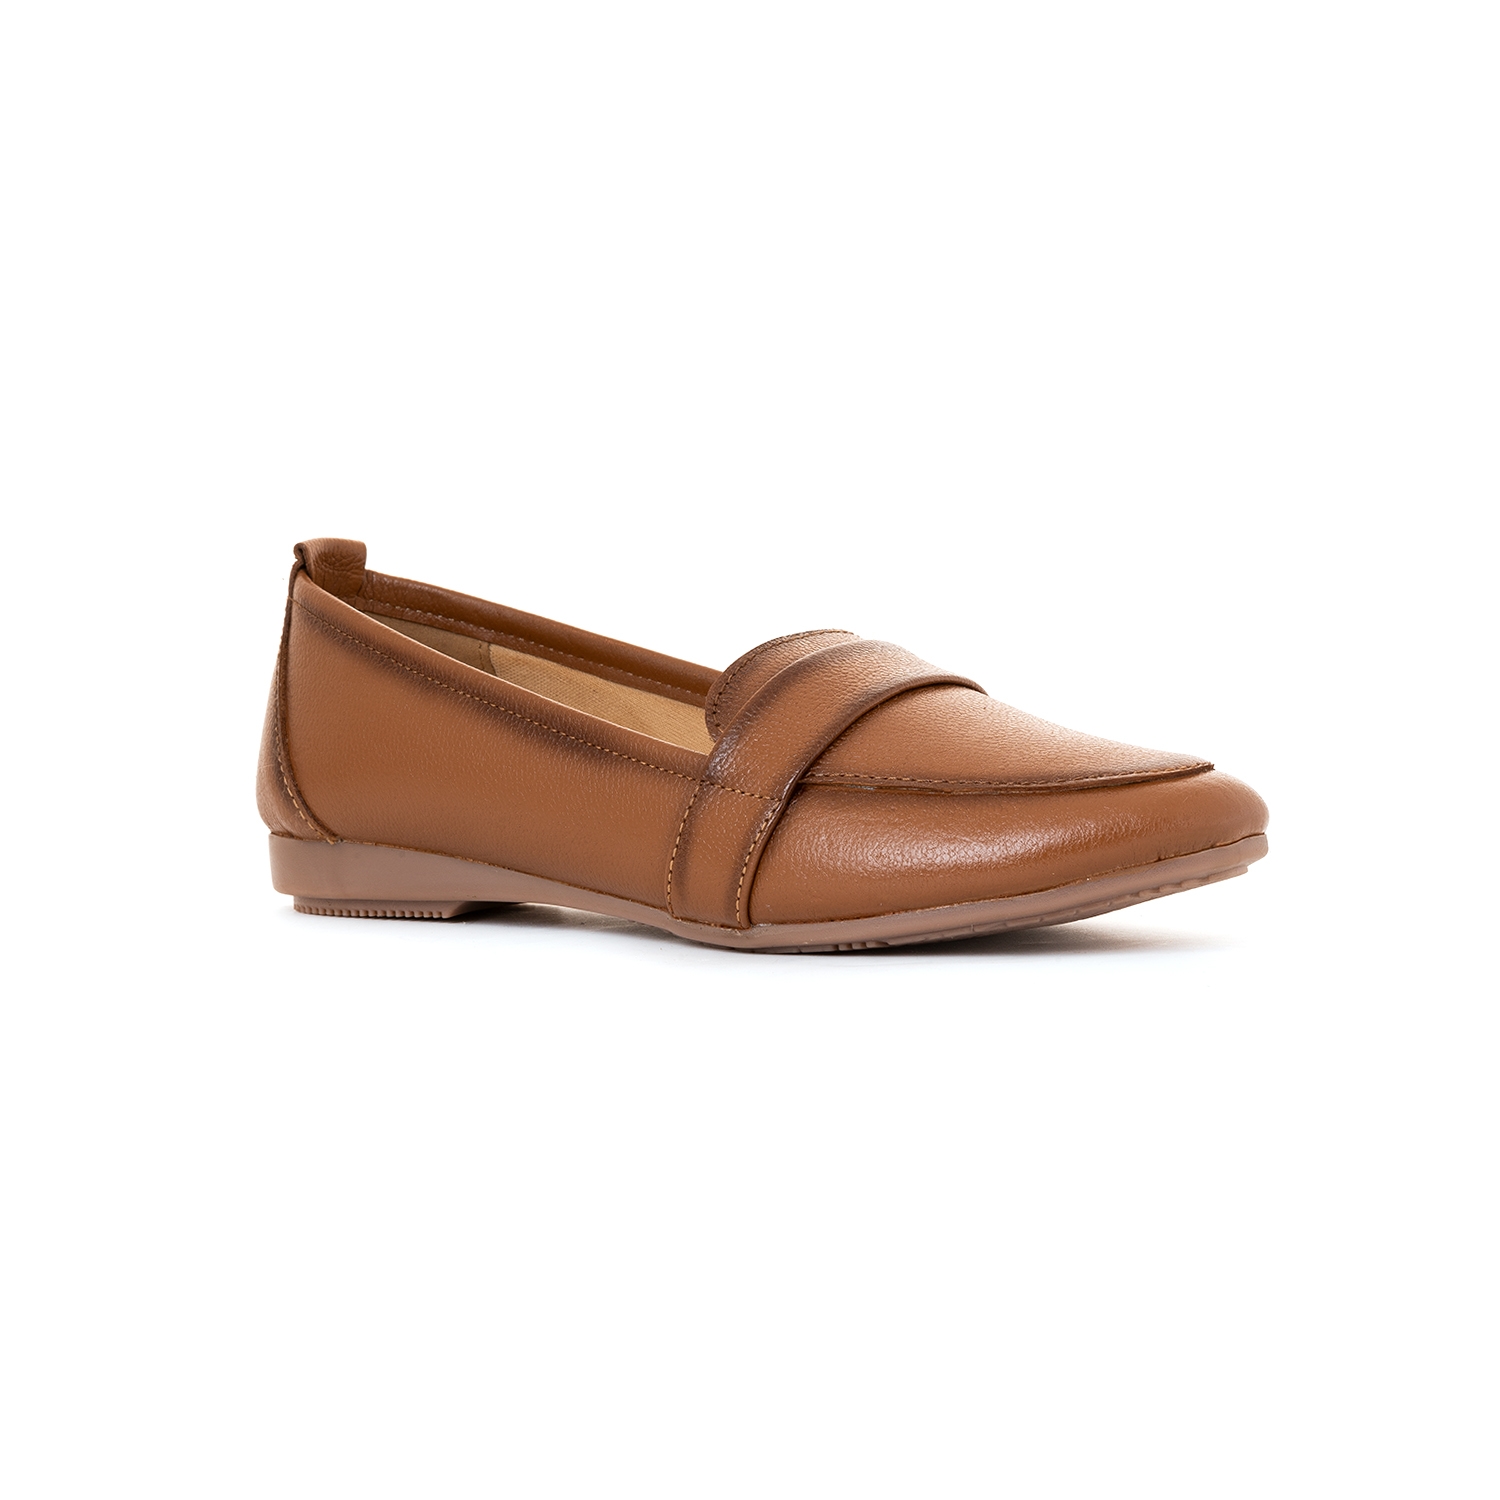 Khadim | Sharon Brown Leather Loafers Casual Shoe for Women